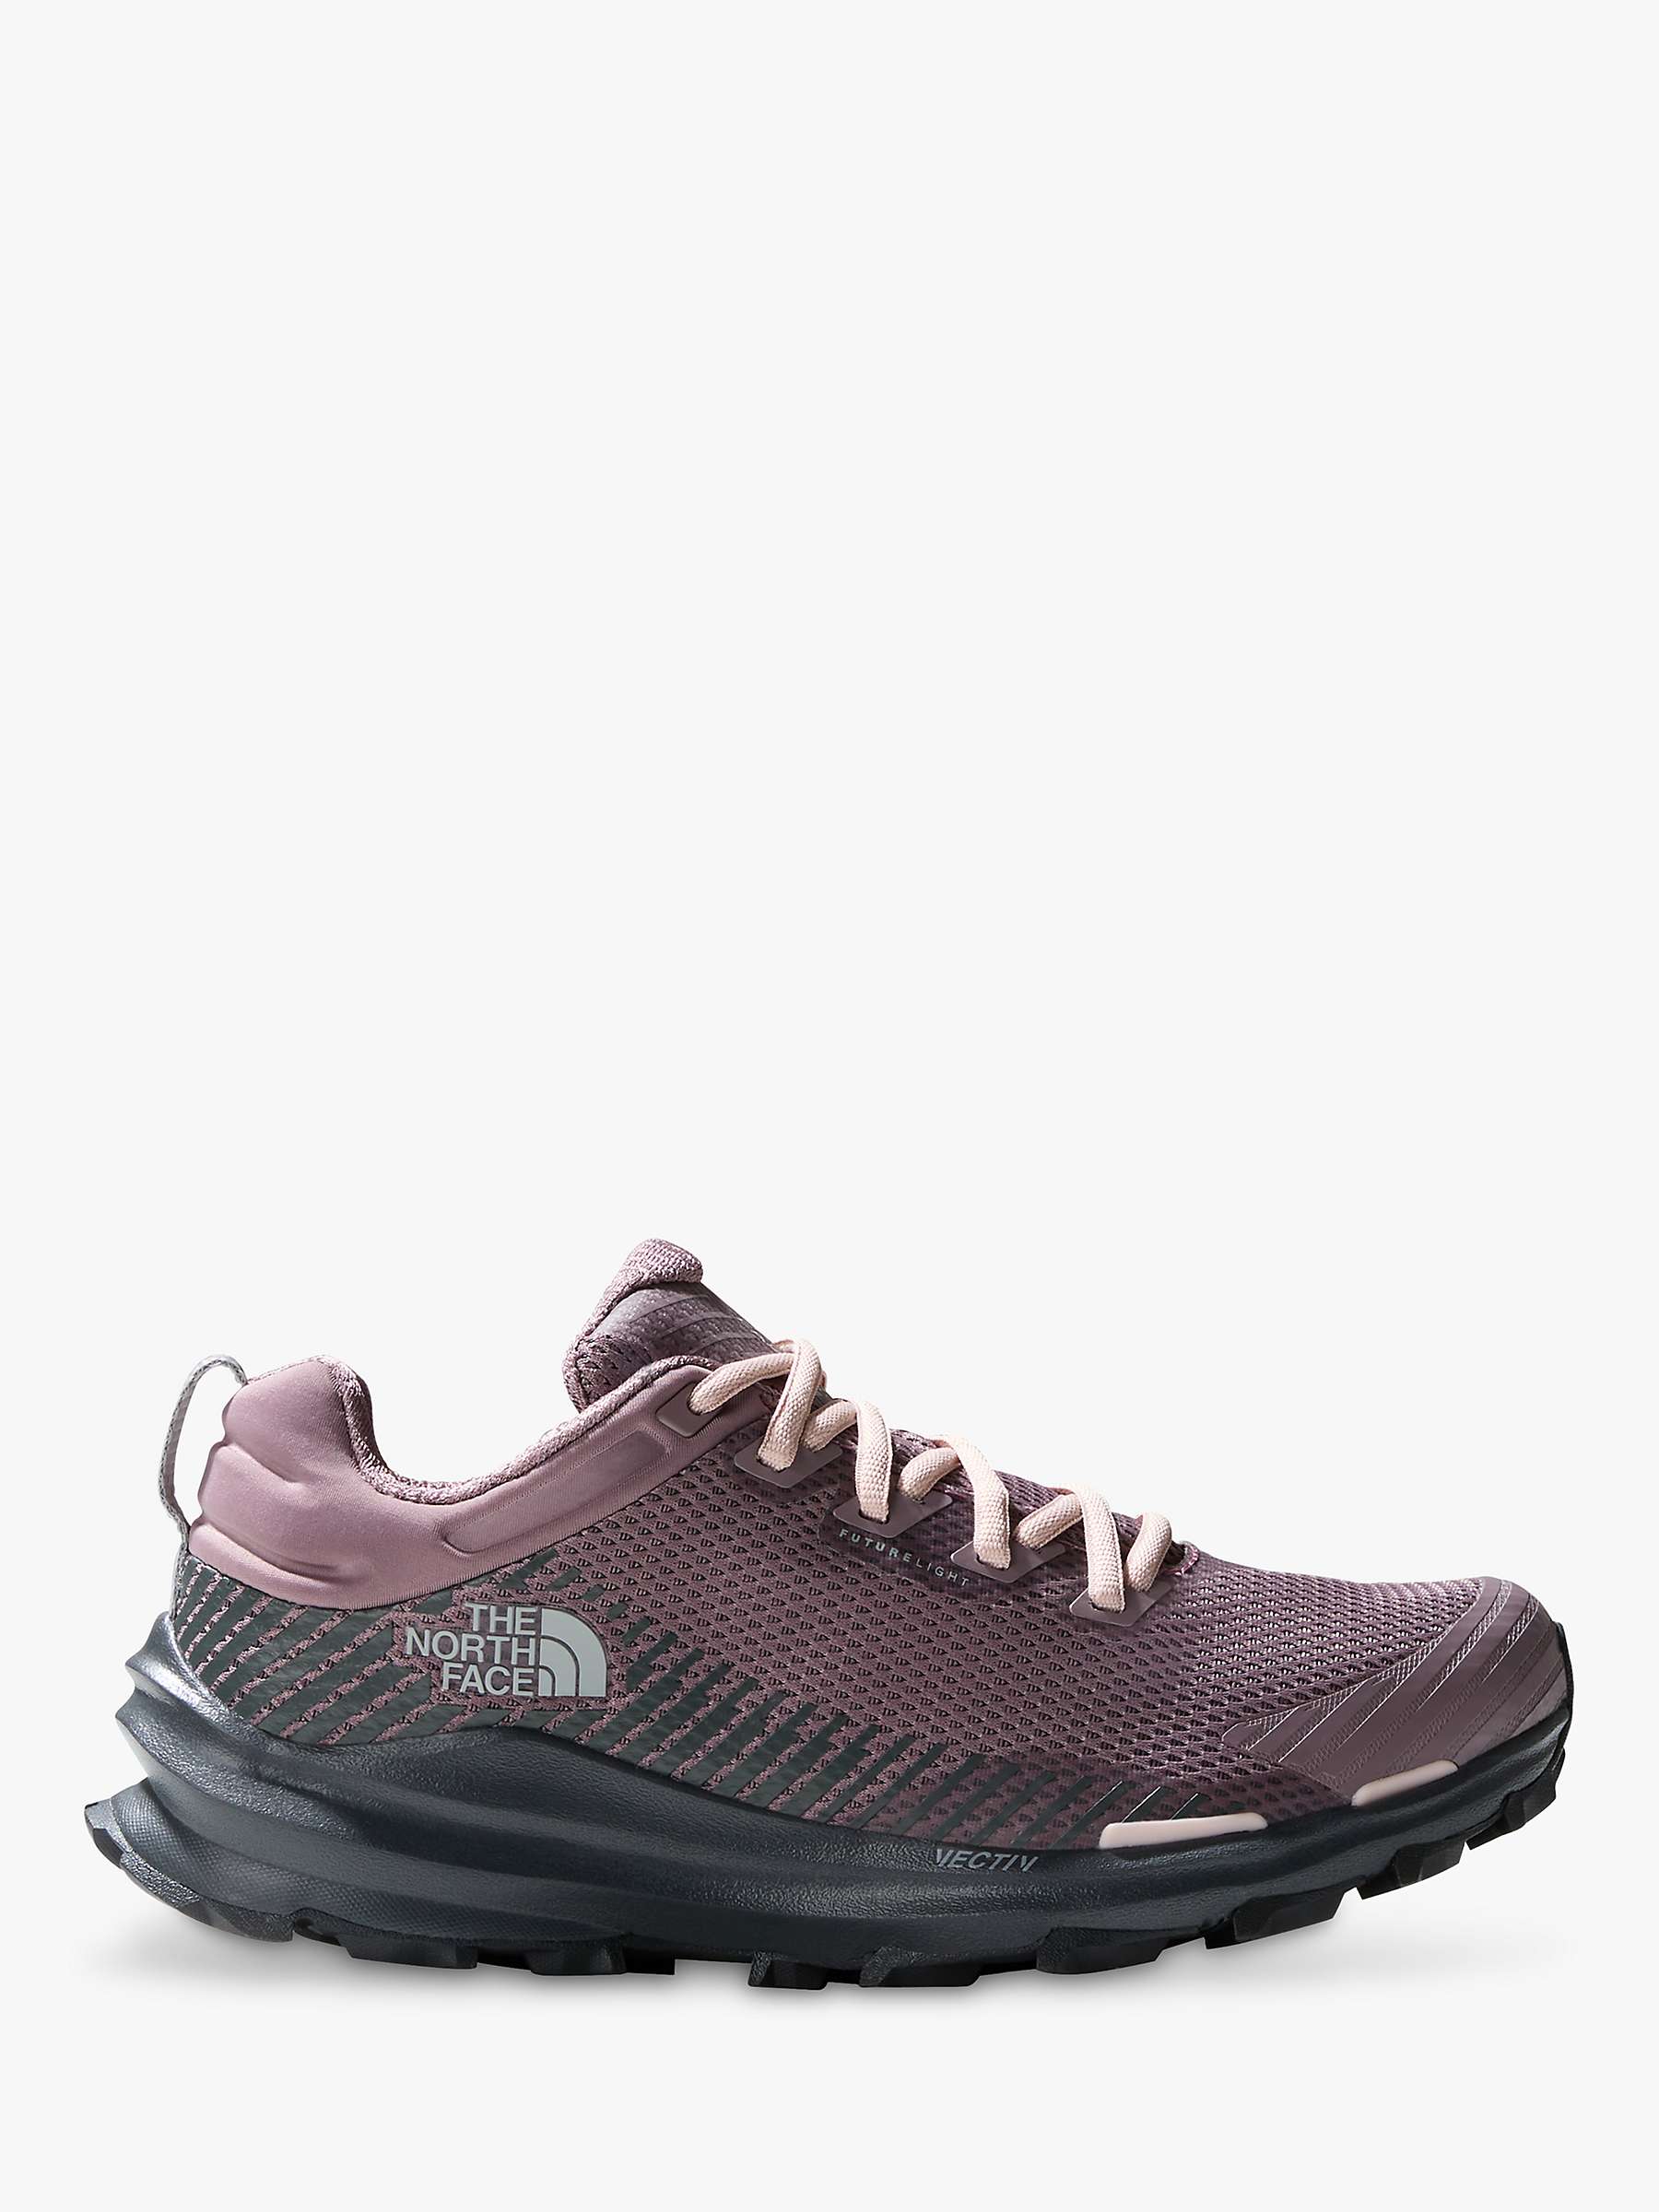 Buy The North Face Vectiv Fastpack Future Light Hiking Shoes Online at johnlewis.com